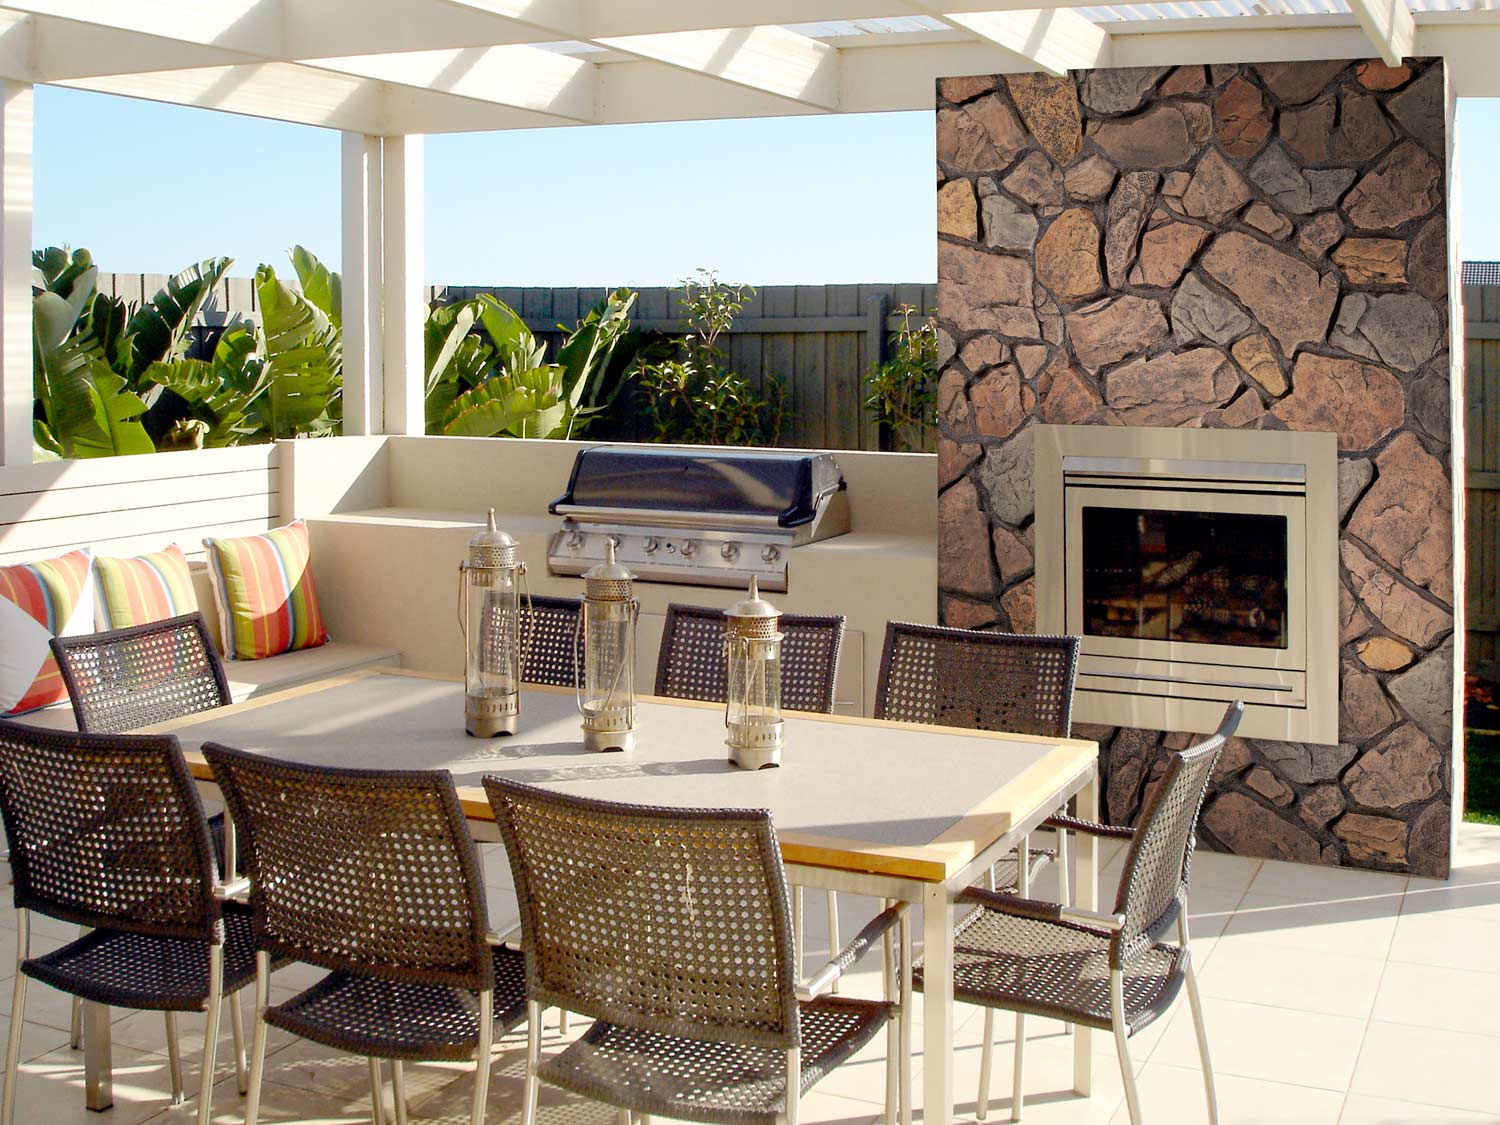 Attractive Anson fieldstone surrounding an outdoor fireplace